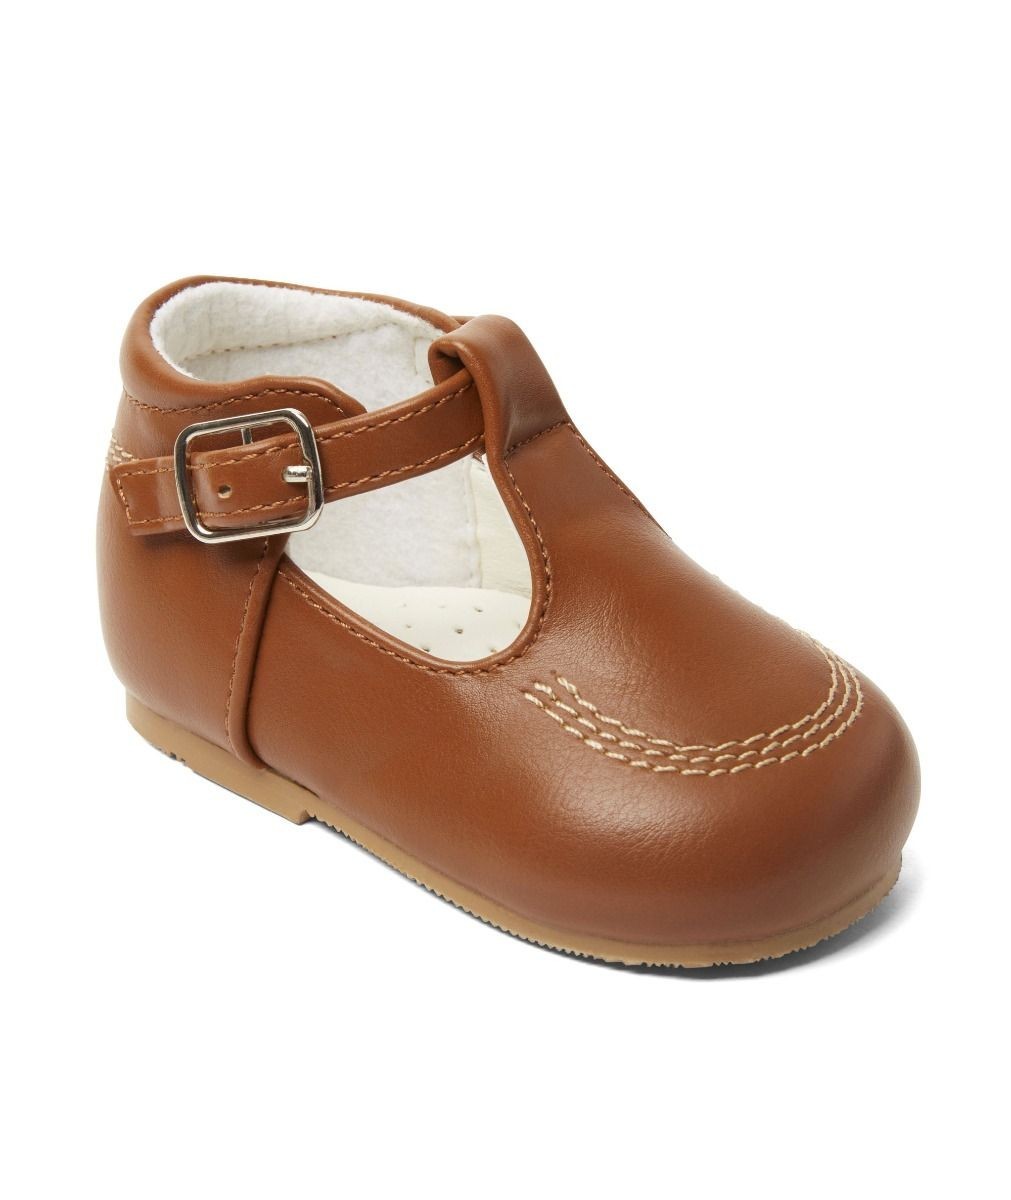 Baby & Boys Buckled Leather Shoes – TEDDY - Tan Brown